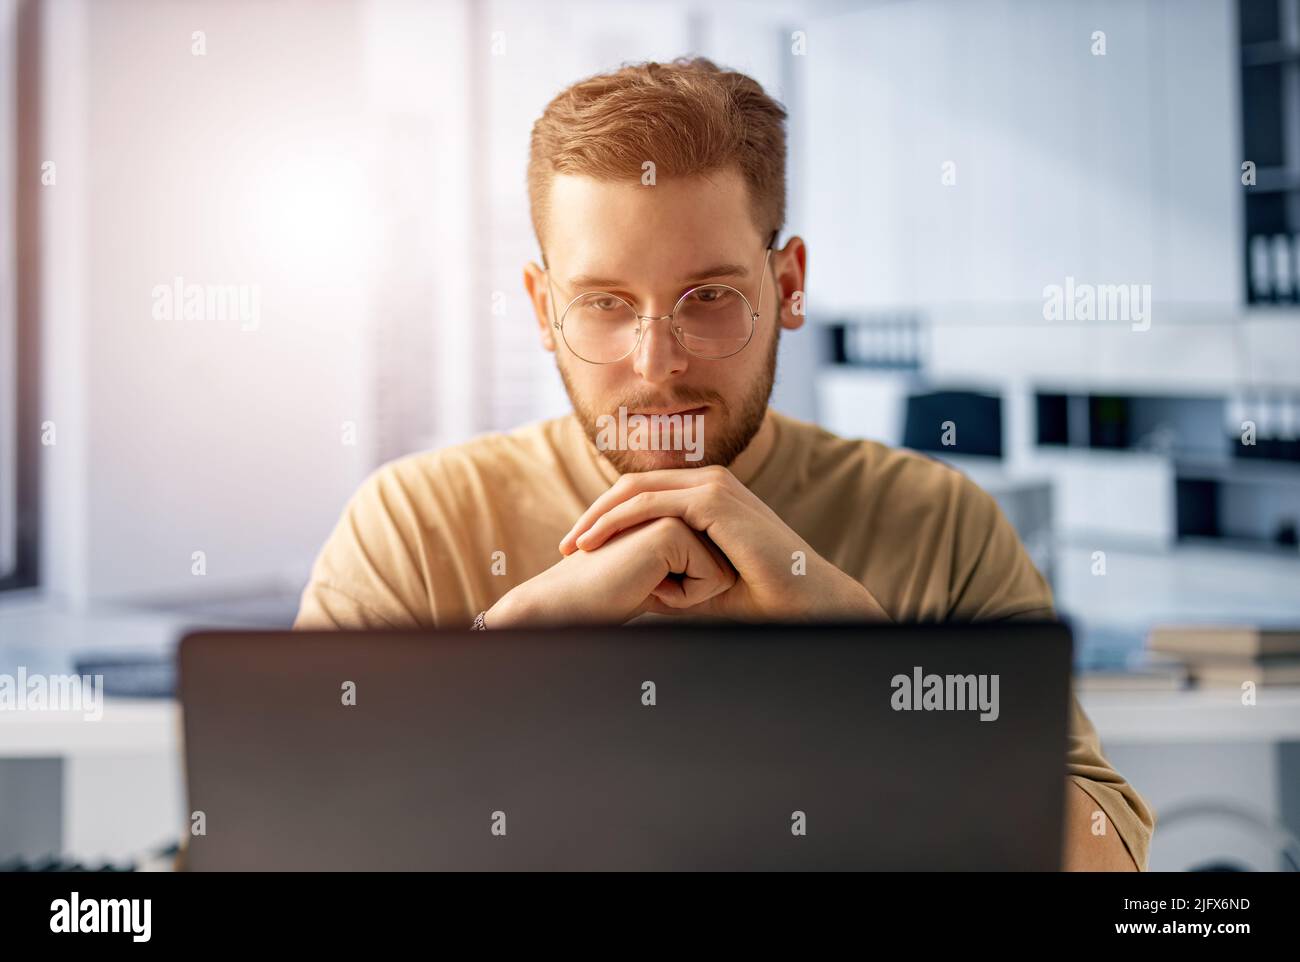 Man using laptop in office Stock Photo